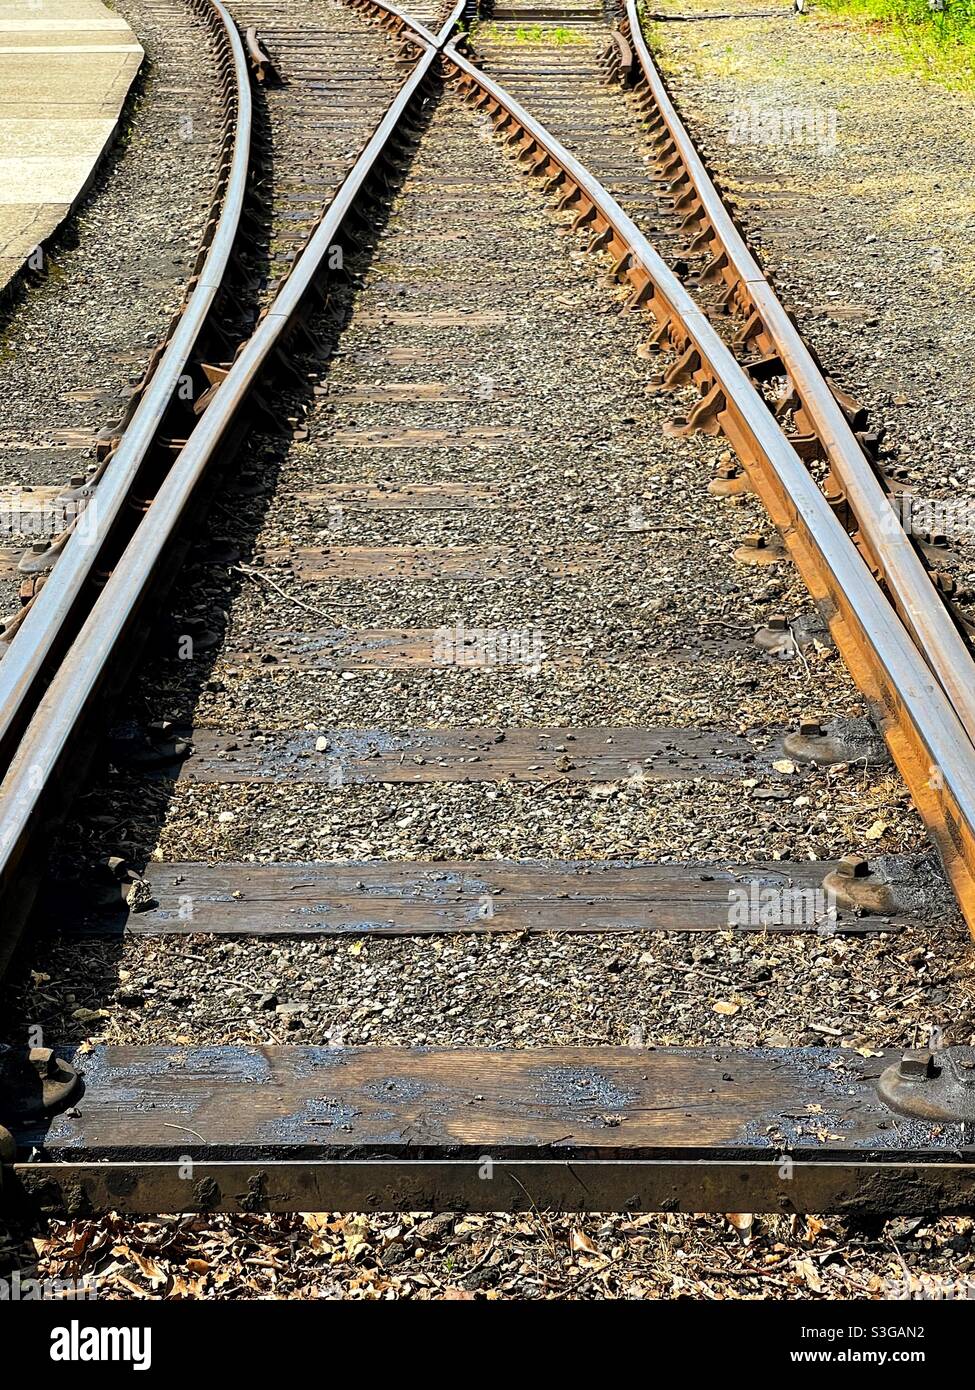 Points on a railway track. Stock Photo